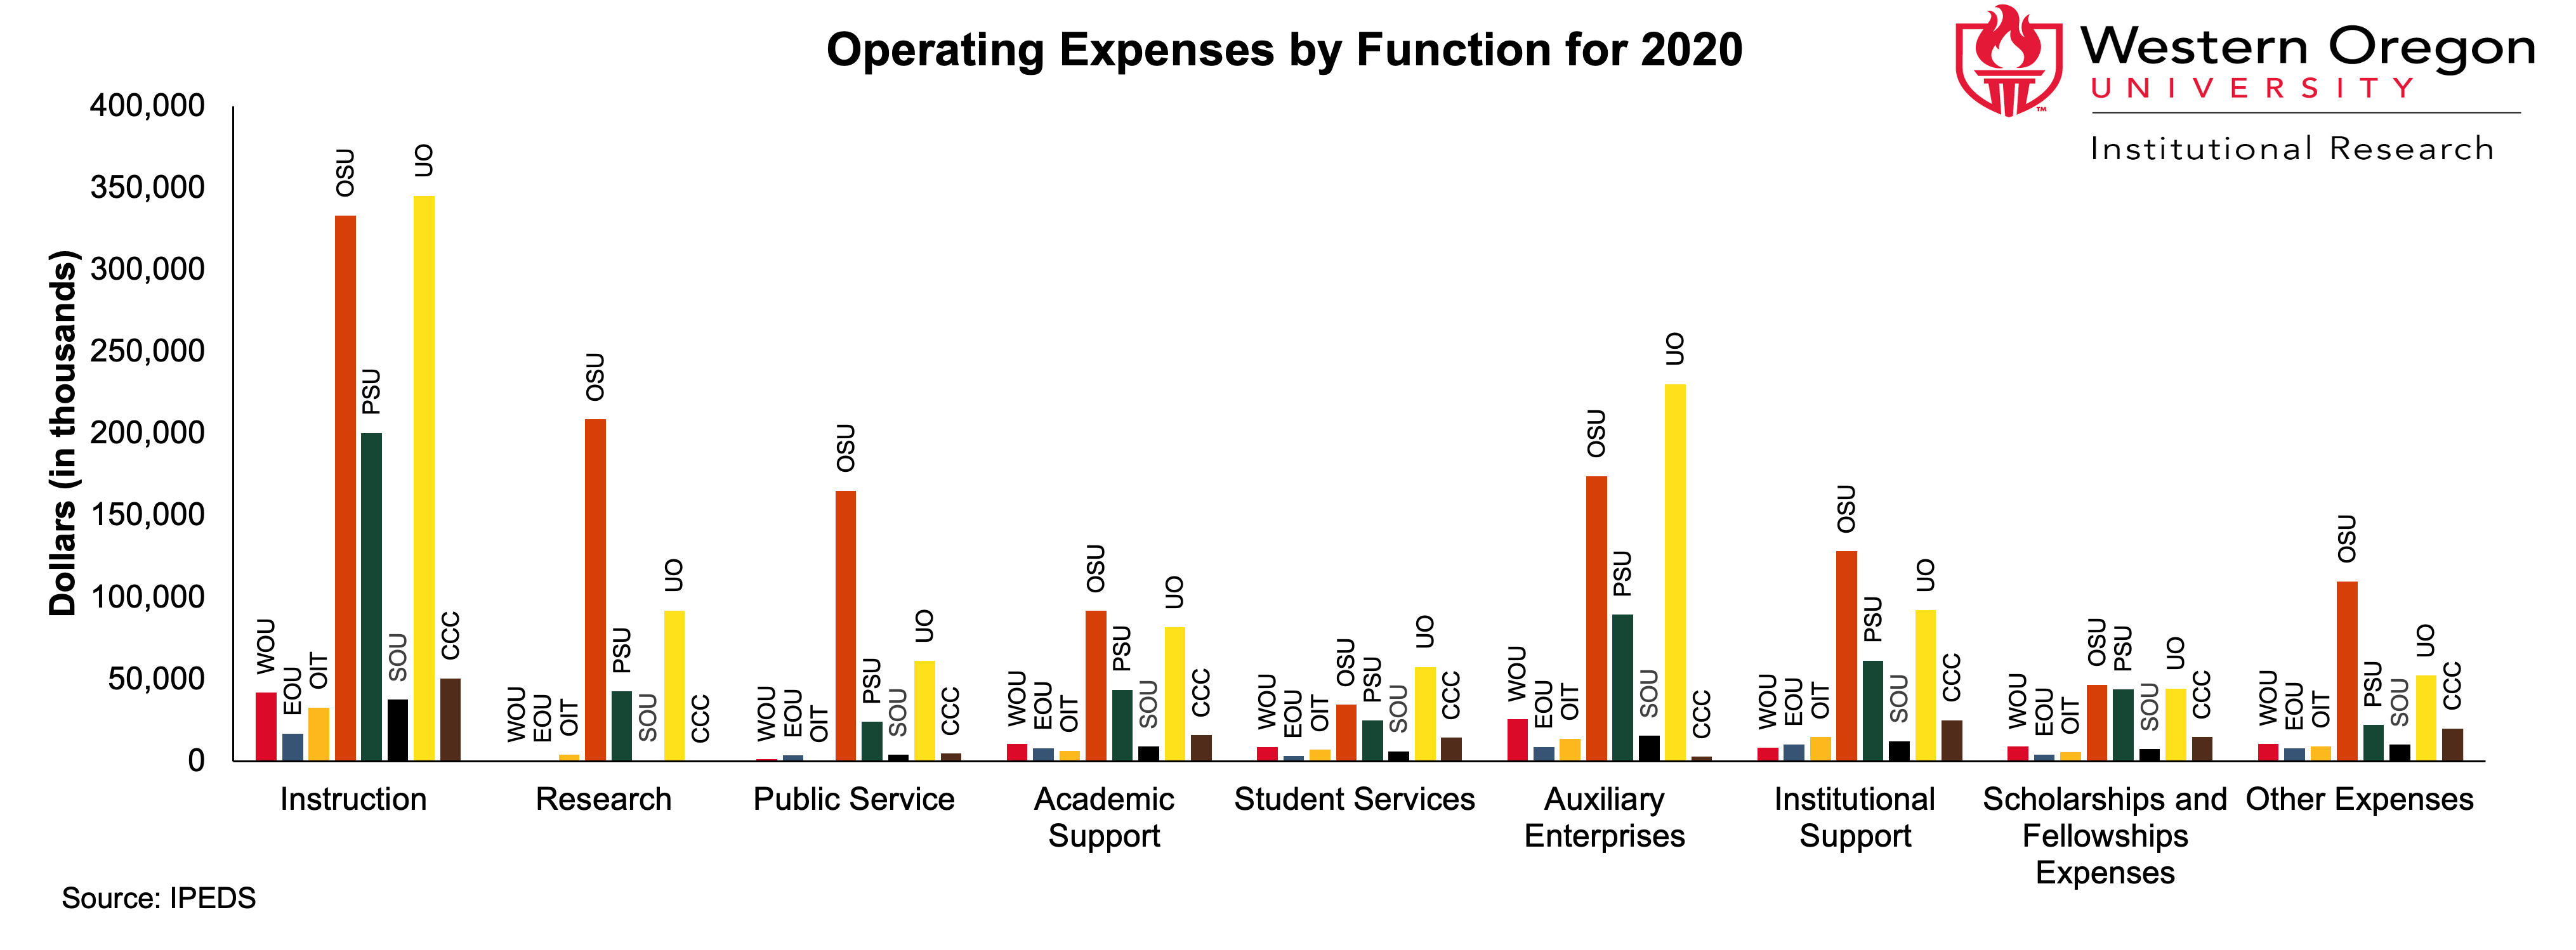 Bar graph of operating expenses at WOU and other Oregon Public Universities in 2020, broken out by institution and function